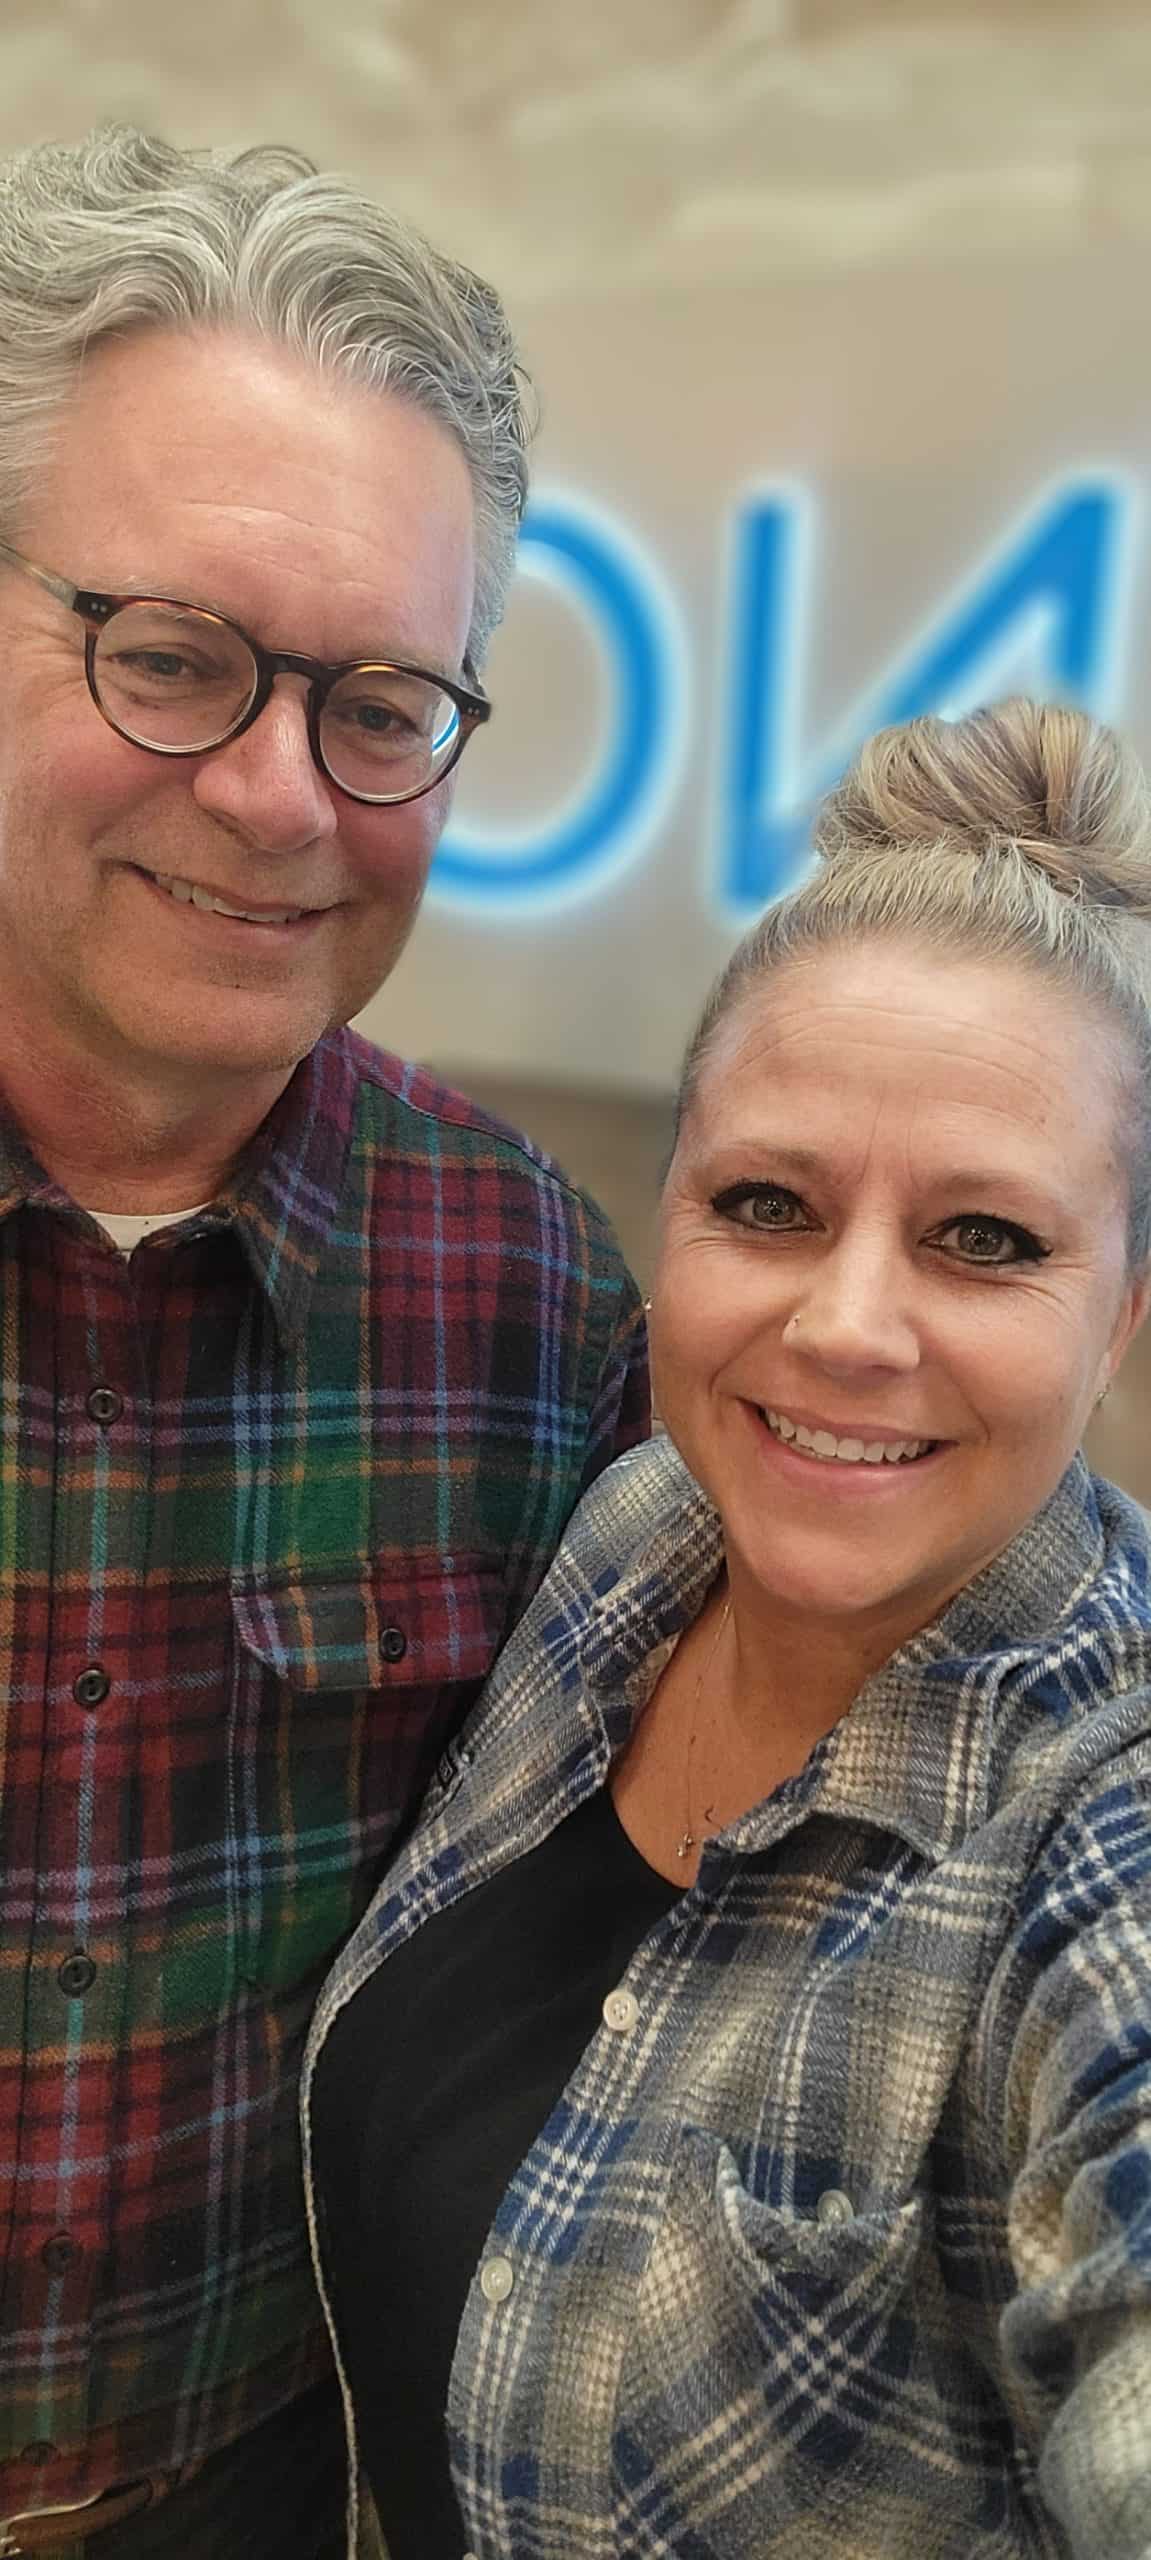 Featured image for “Attorneys Steve Caya and Emily Dykstra Support Flannel Fest”